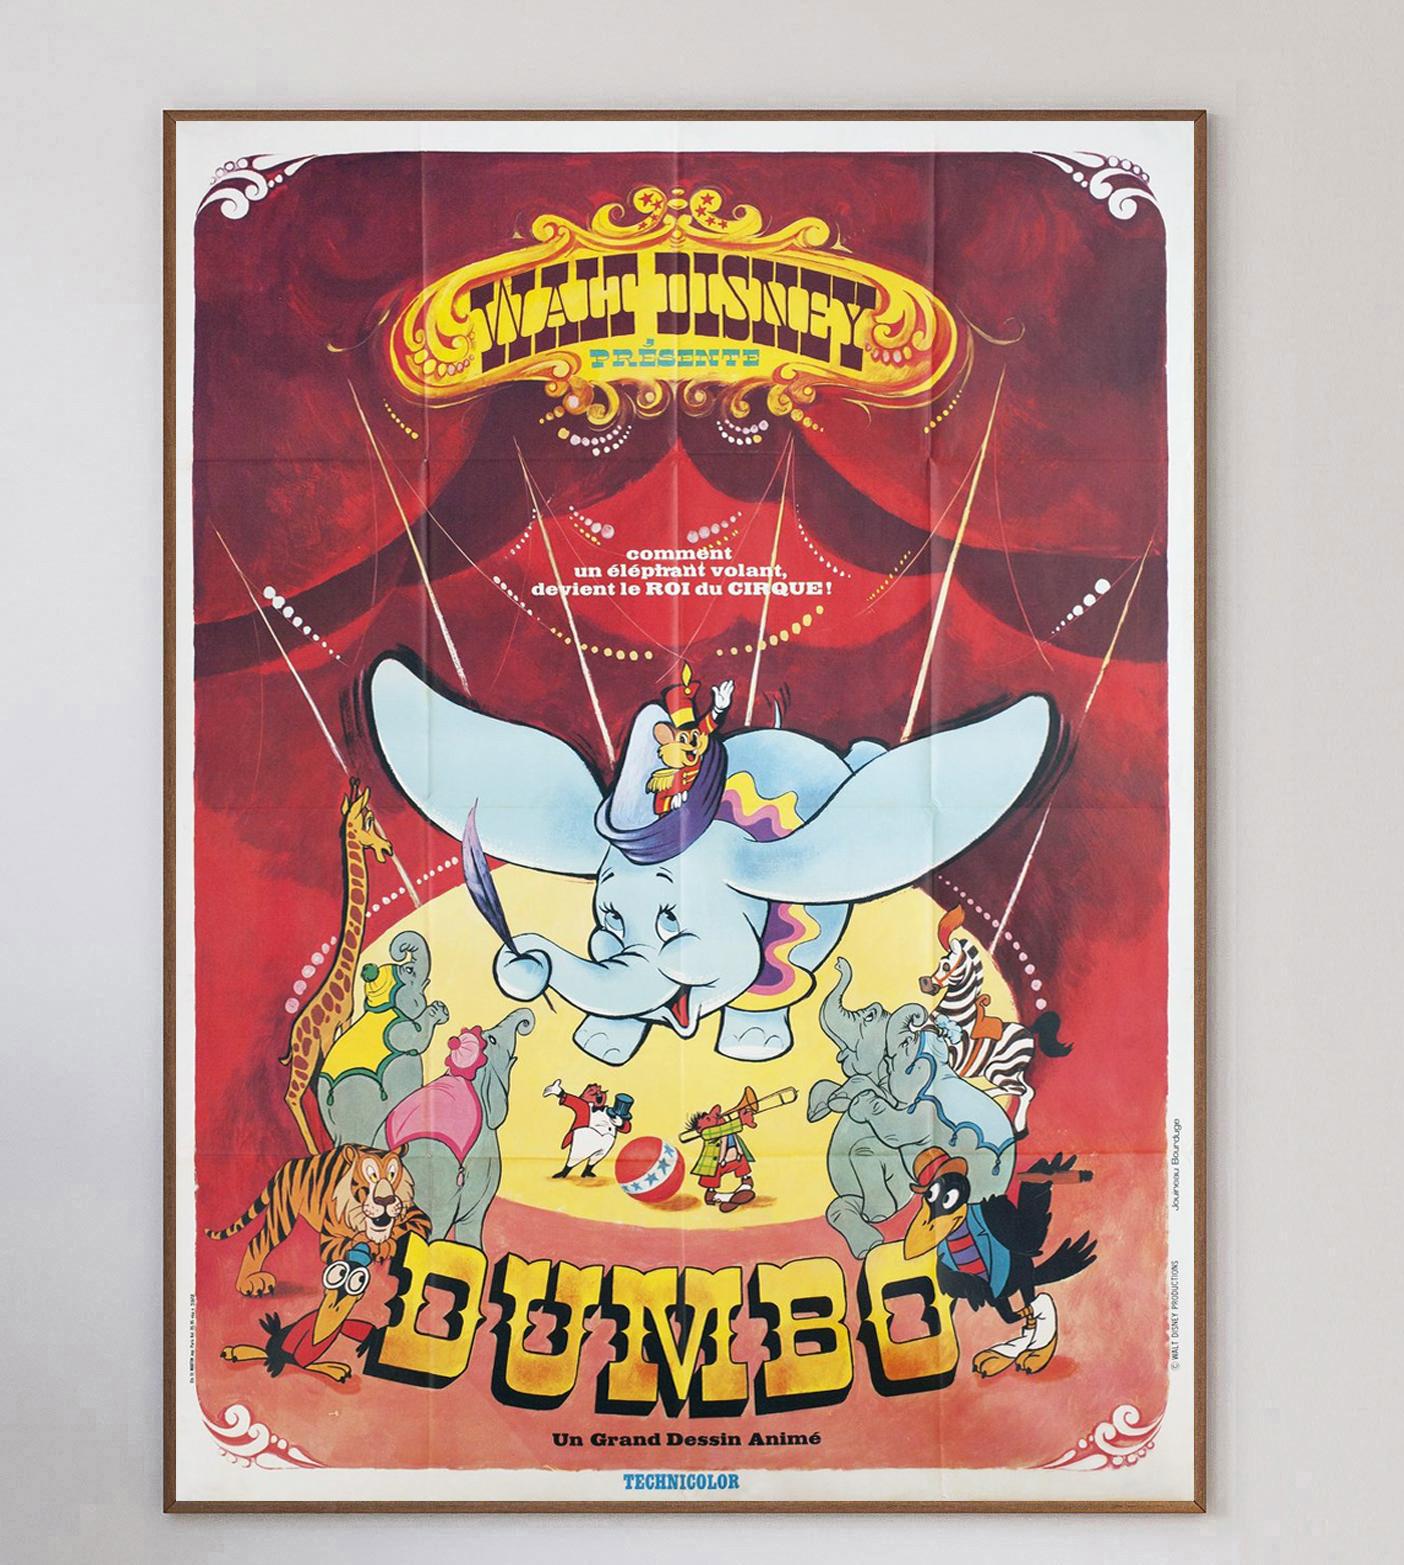 Beautiful poster of the classic Disney film Dumbo from the French release of the film. Released in 1941 by Walt Disney Productions & released by RKO Radio Pictures, Dumbo was just the fourth Disney feature film.

This great piece is from the 1970